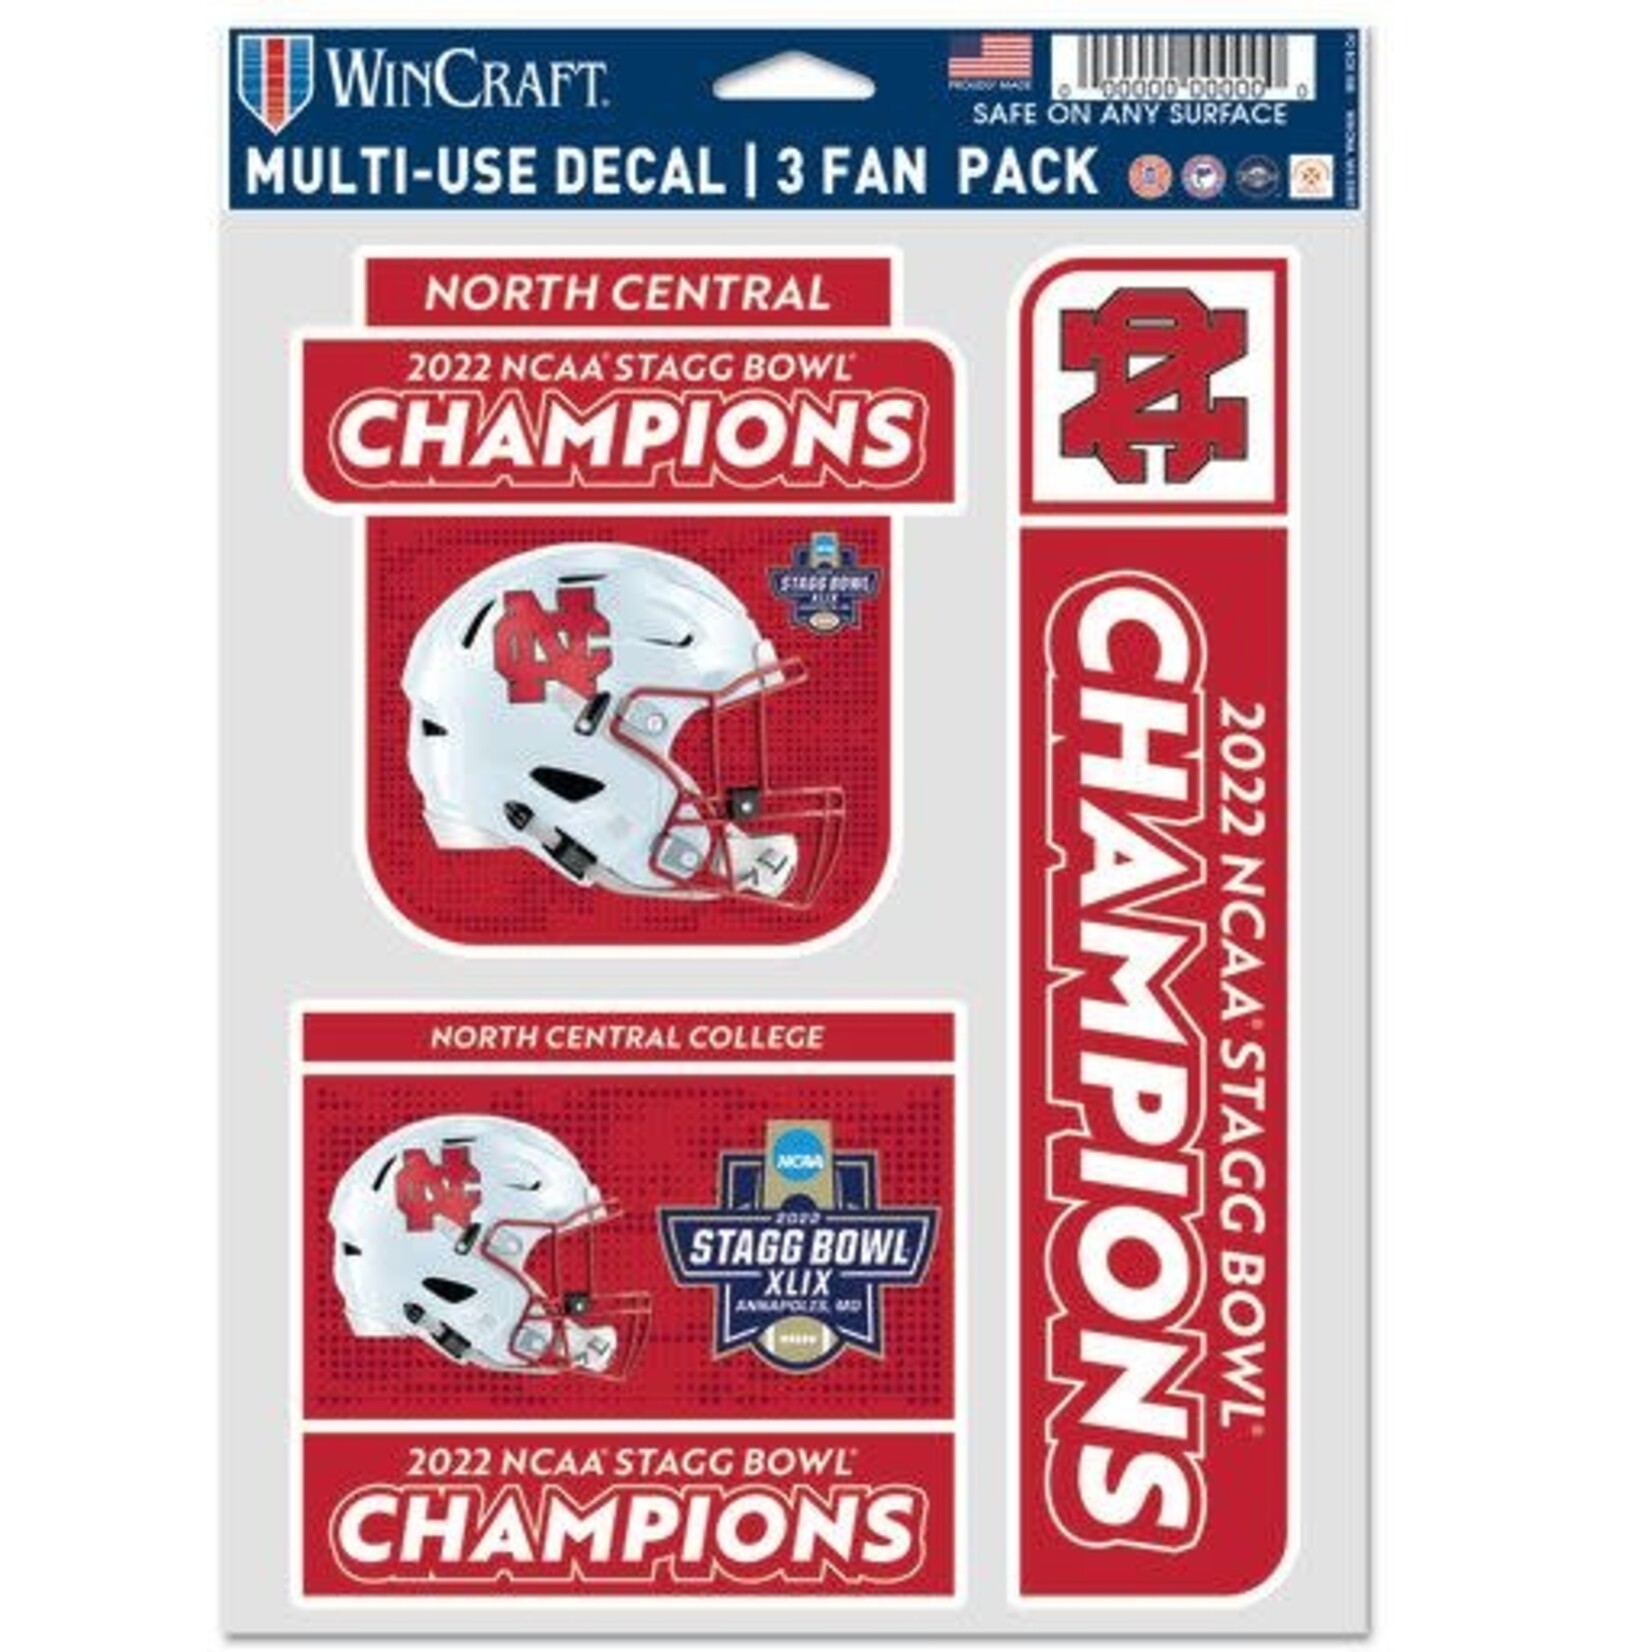 Wincraft 2022 National Football Champions Decal 3 pack Fan Pack by Wincraft